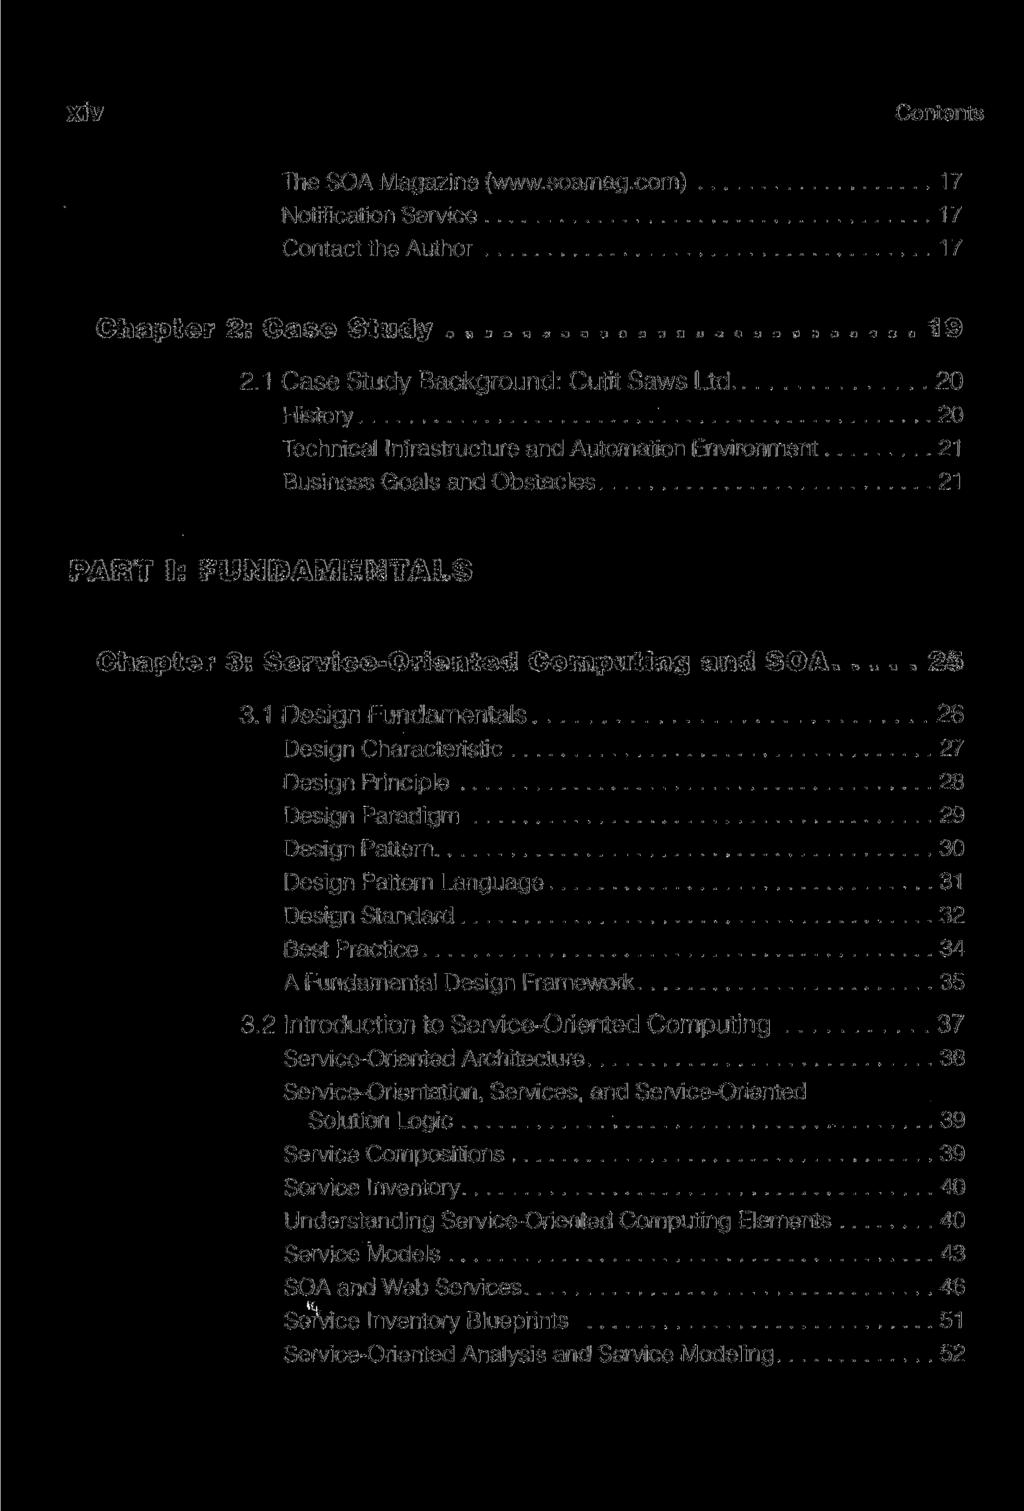 Xiv Contents The SOA Magazine (www.soamag.com) 17 Notification Service 17 Contact the Author 17 Chapter 2: Gase Study 19 2.